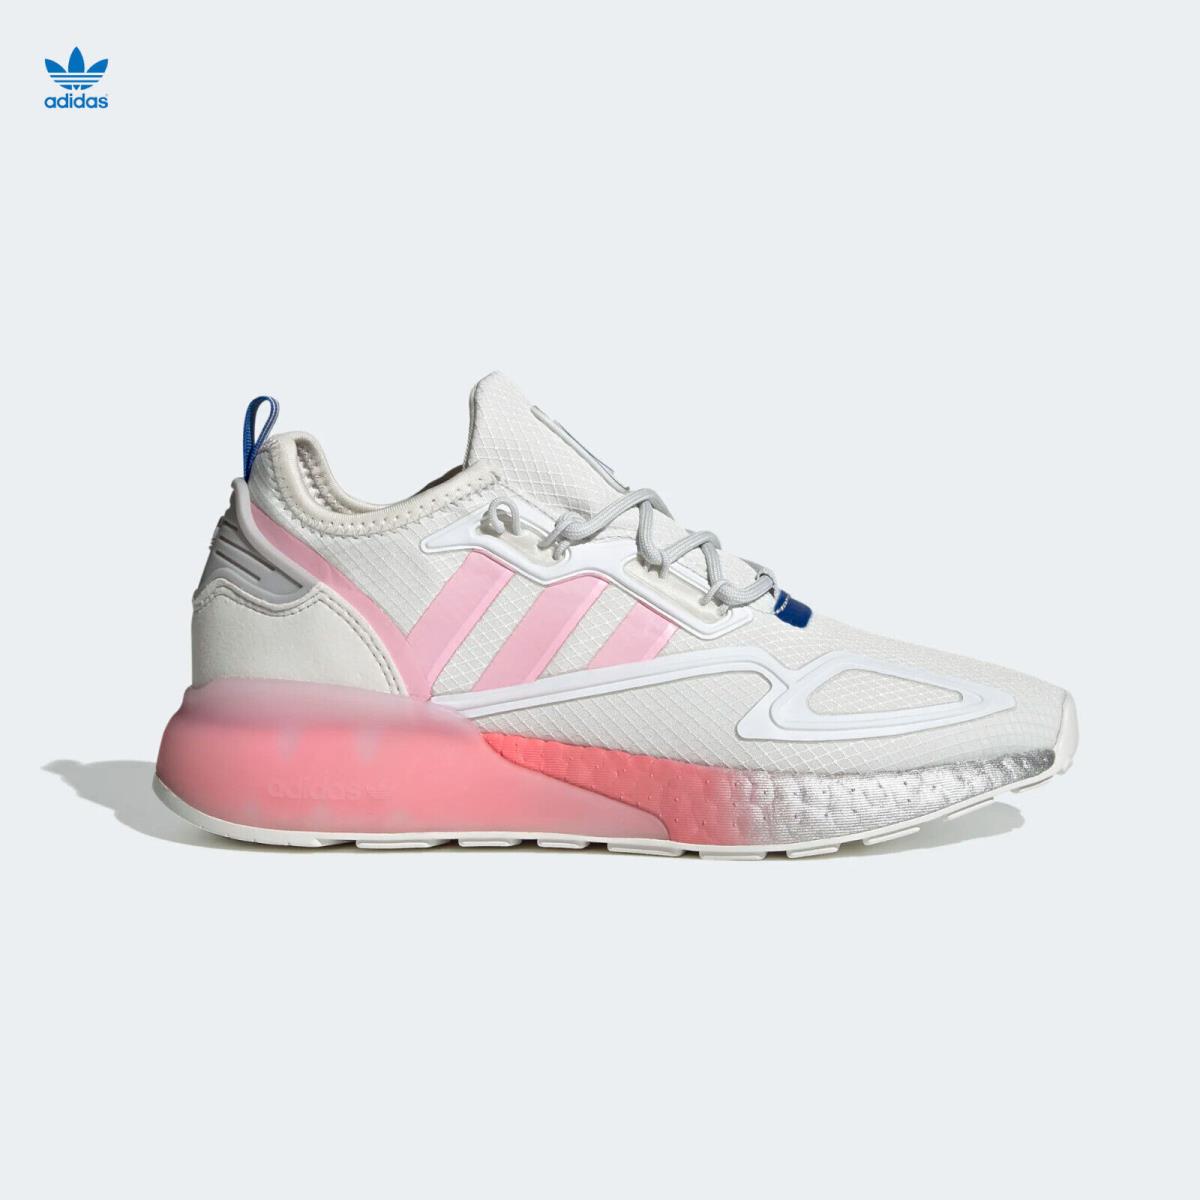 aspect Ministry Opposite Adidas Originals x Nasa ZX 2K Boost Shoes White / Pink FZ3900 Women`s Size  8 | 194817366661 - Adidas shoes - Crystal White / True Pink / Matte Silver  | SporTipTop